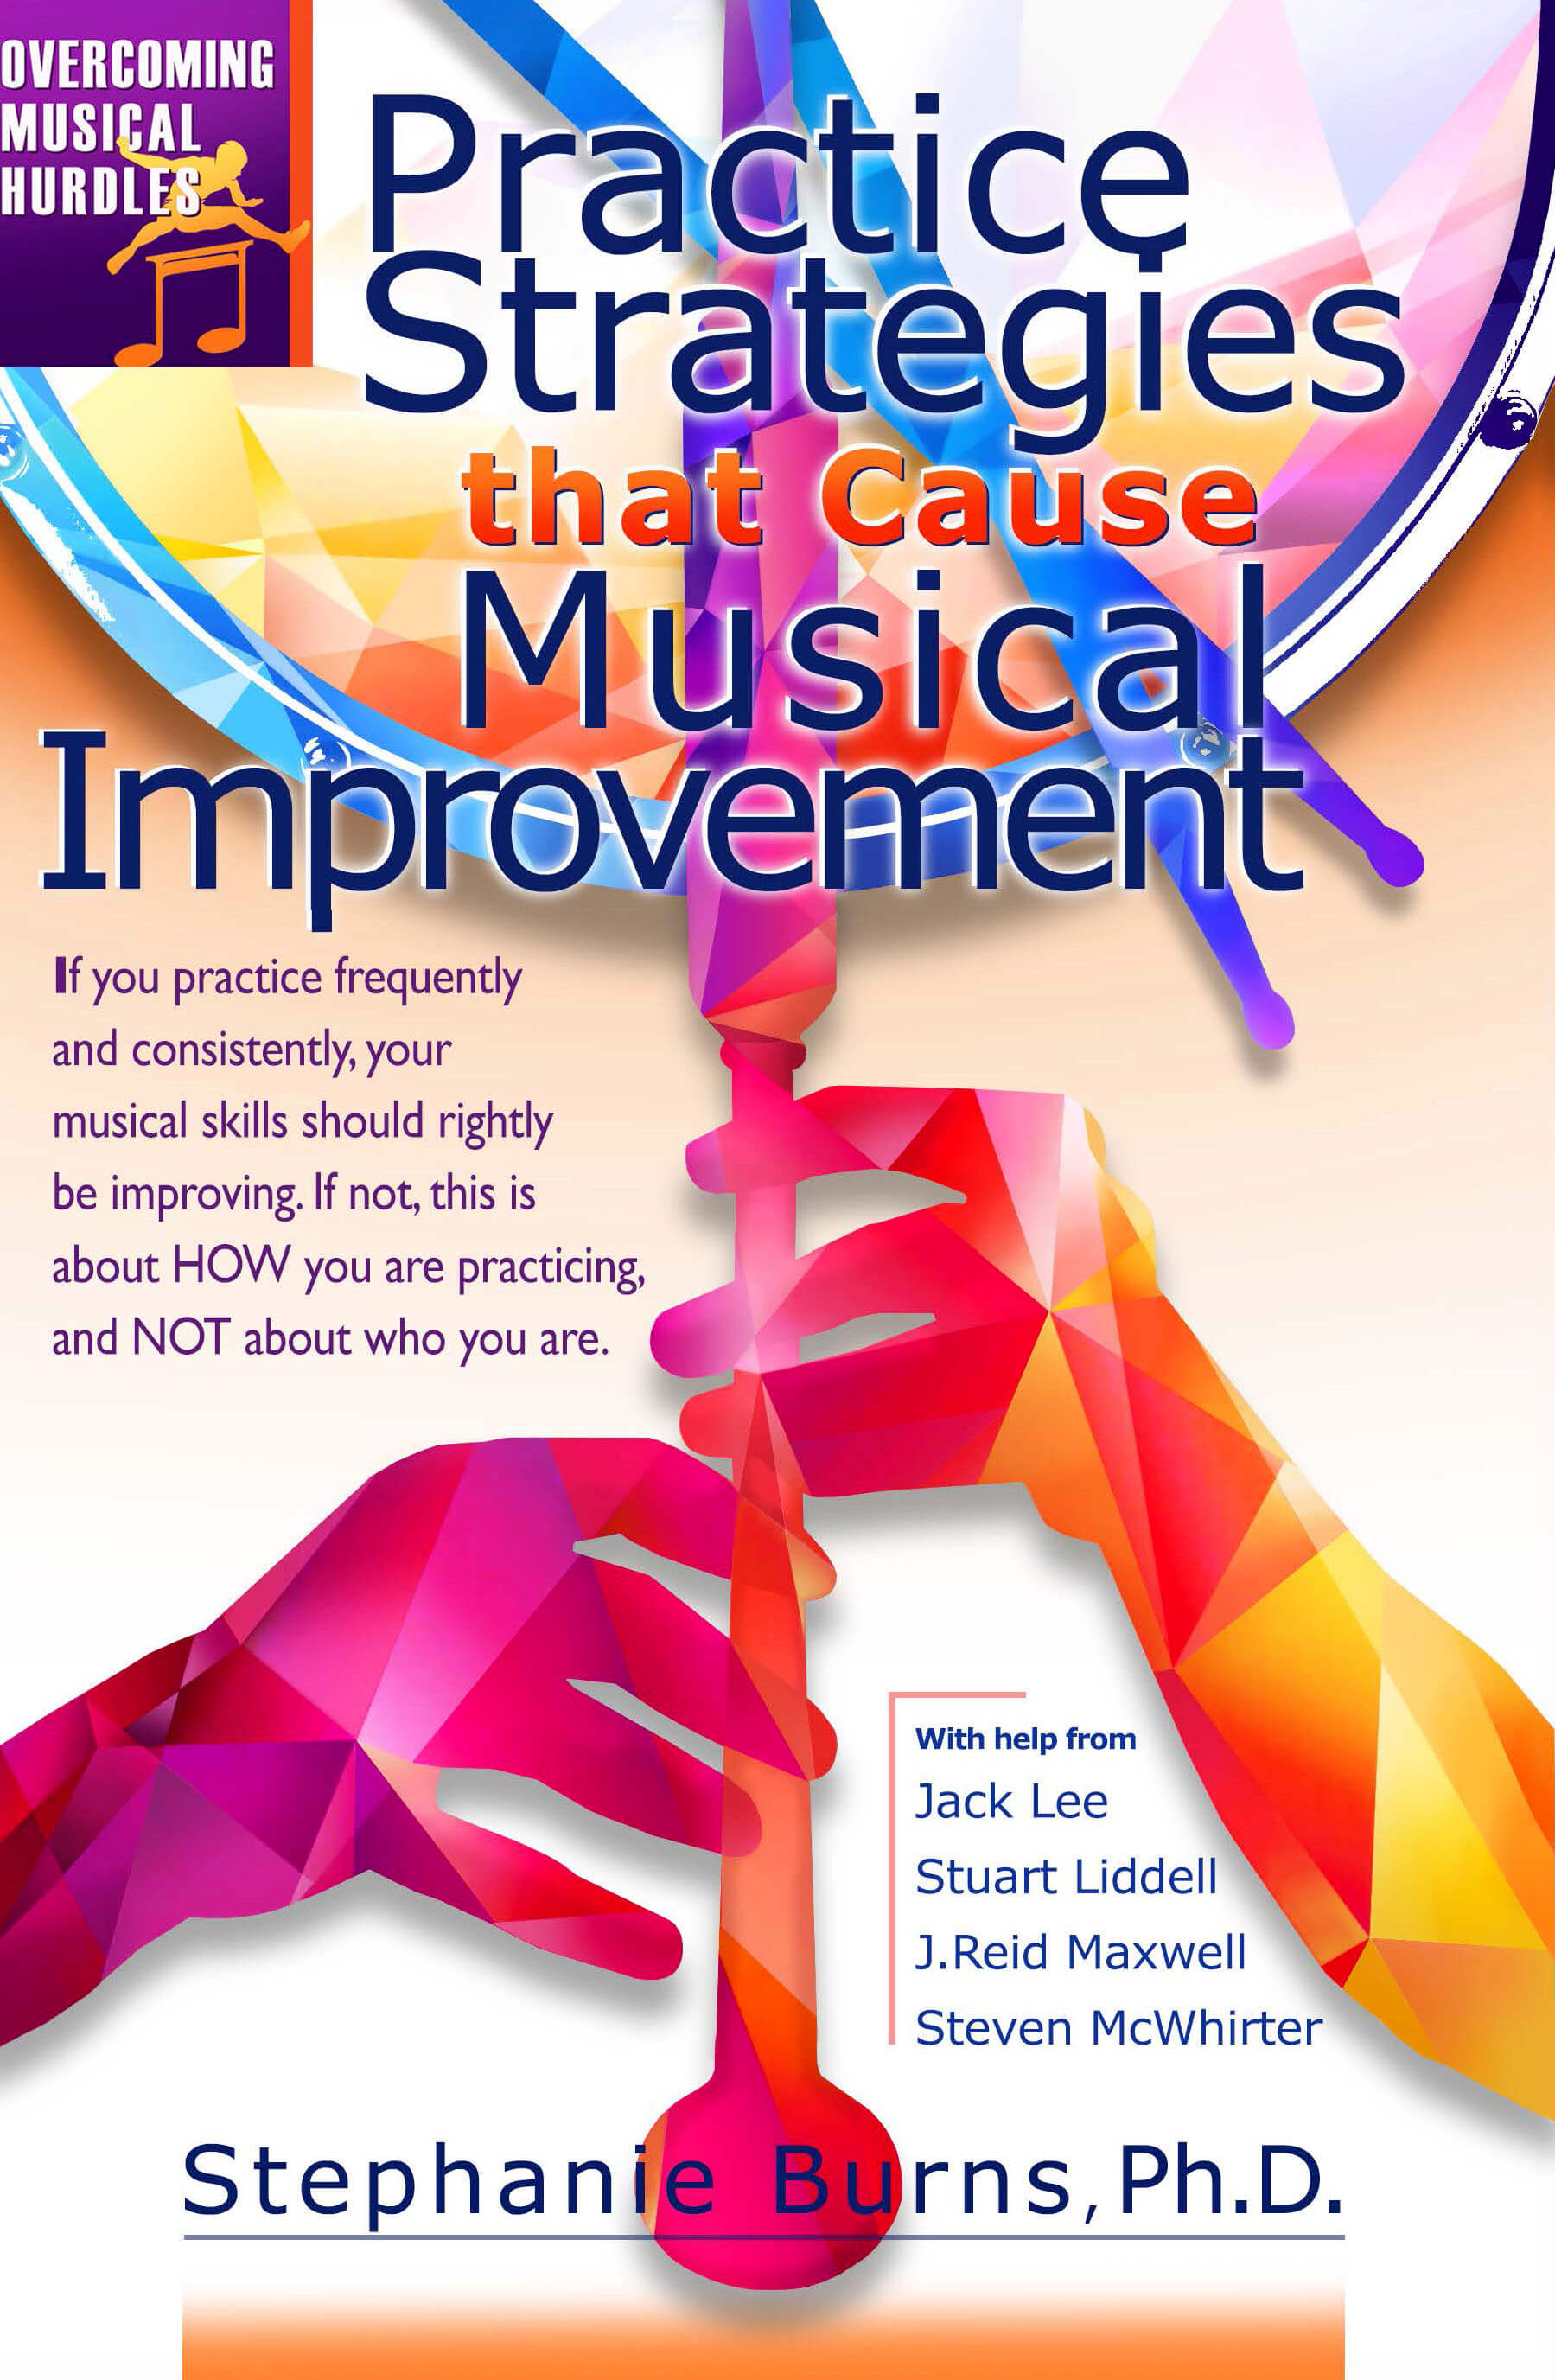 Book review: Practice Strategies That Cause Musical Improvement